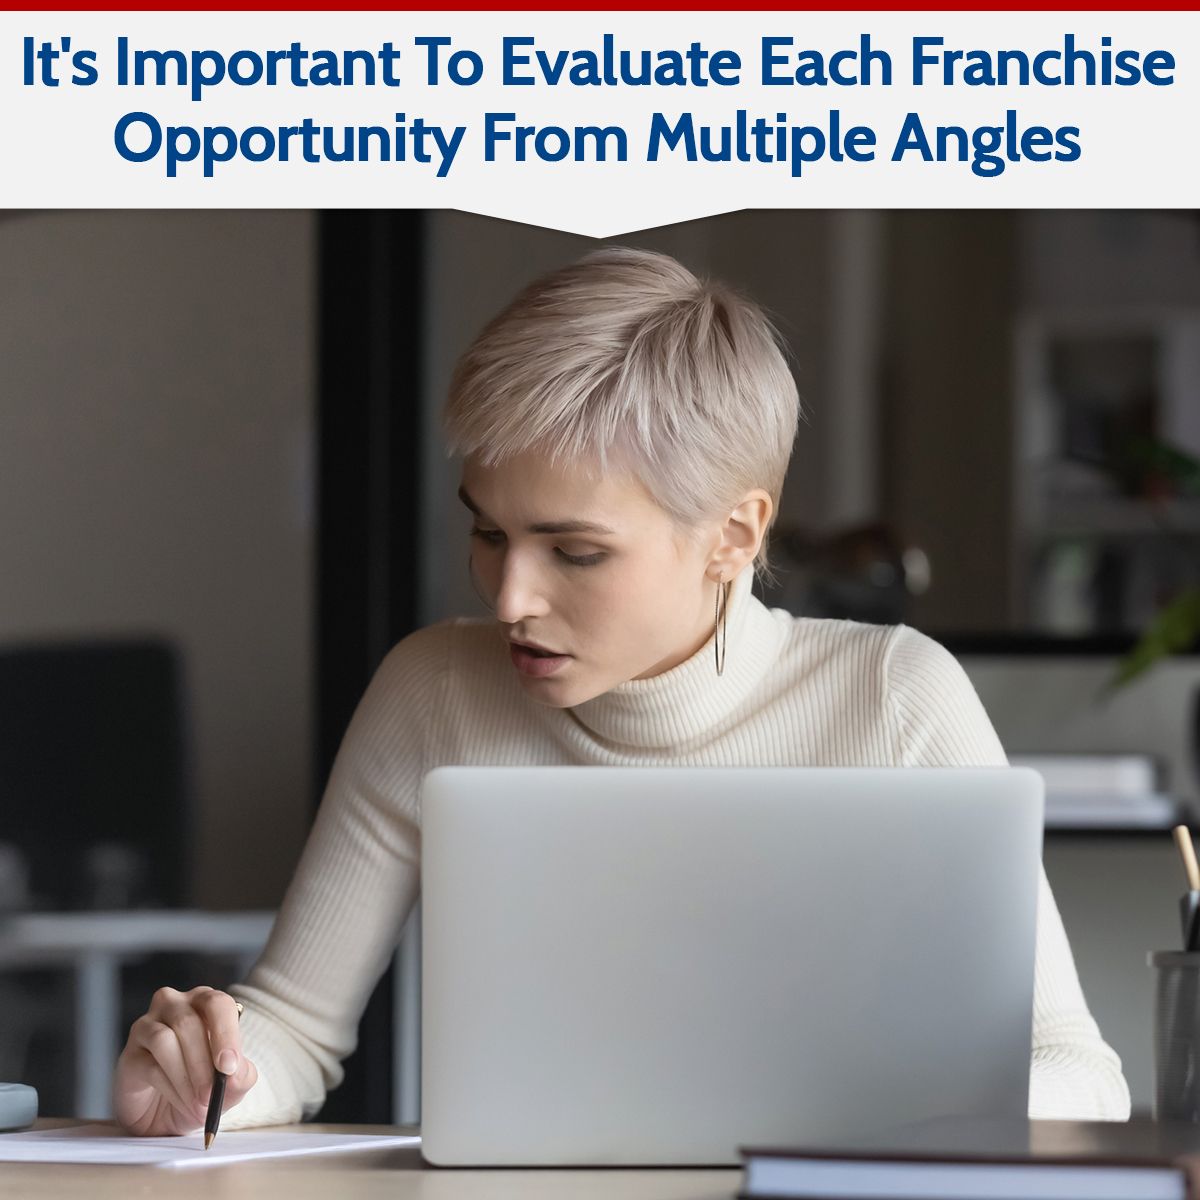 It's Important To Evaluate Each Franchise Opportunity From Multiple Angles